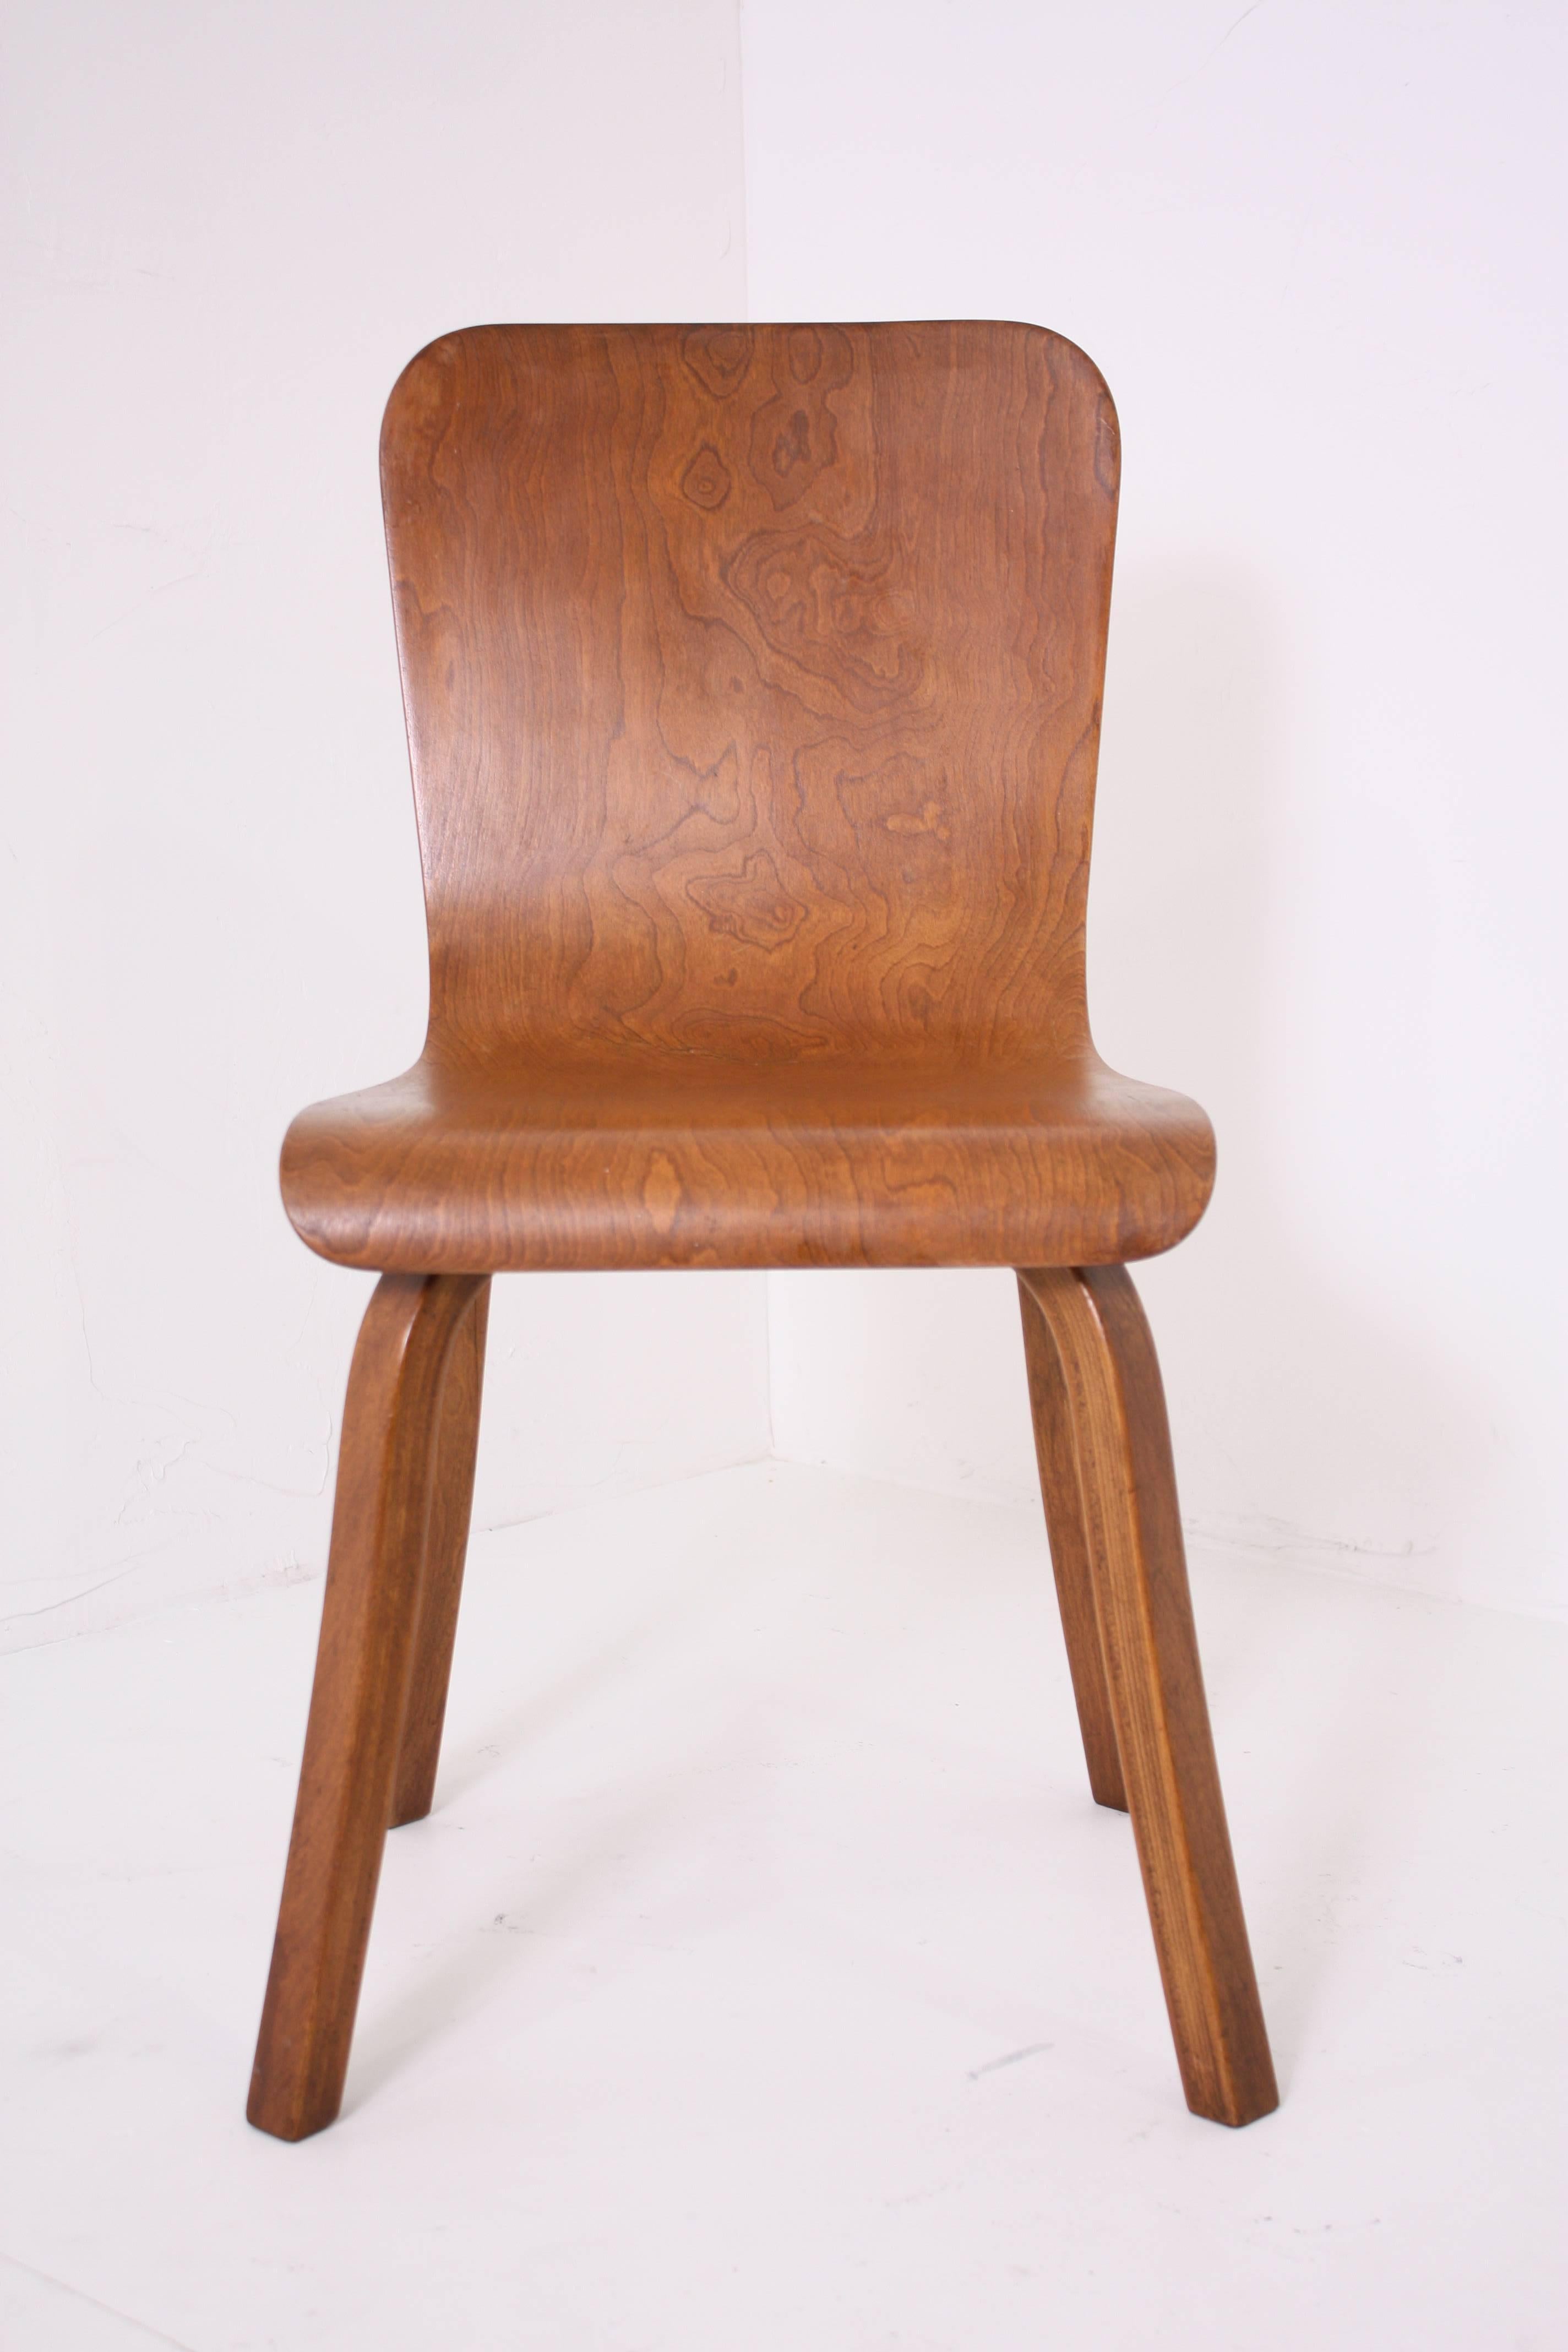 Bentwood side chair by Waclaw Czerwinski and Hilary Sylolt for Canadian Wooden Aircraft in 1946. From the curated collection Space 20th Century Modern.